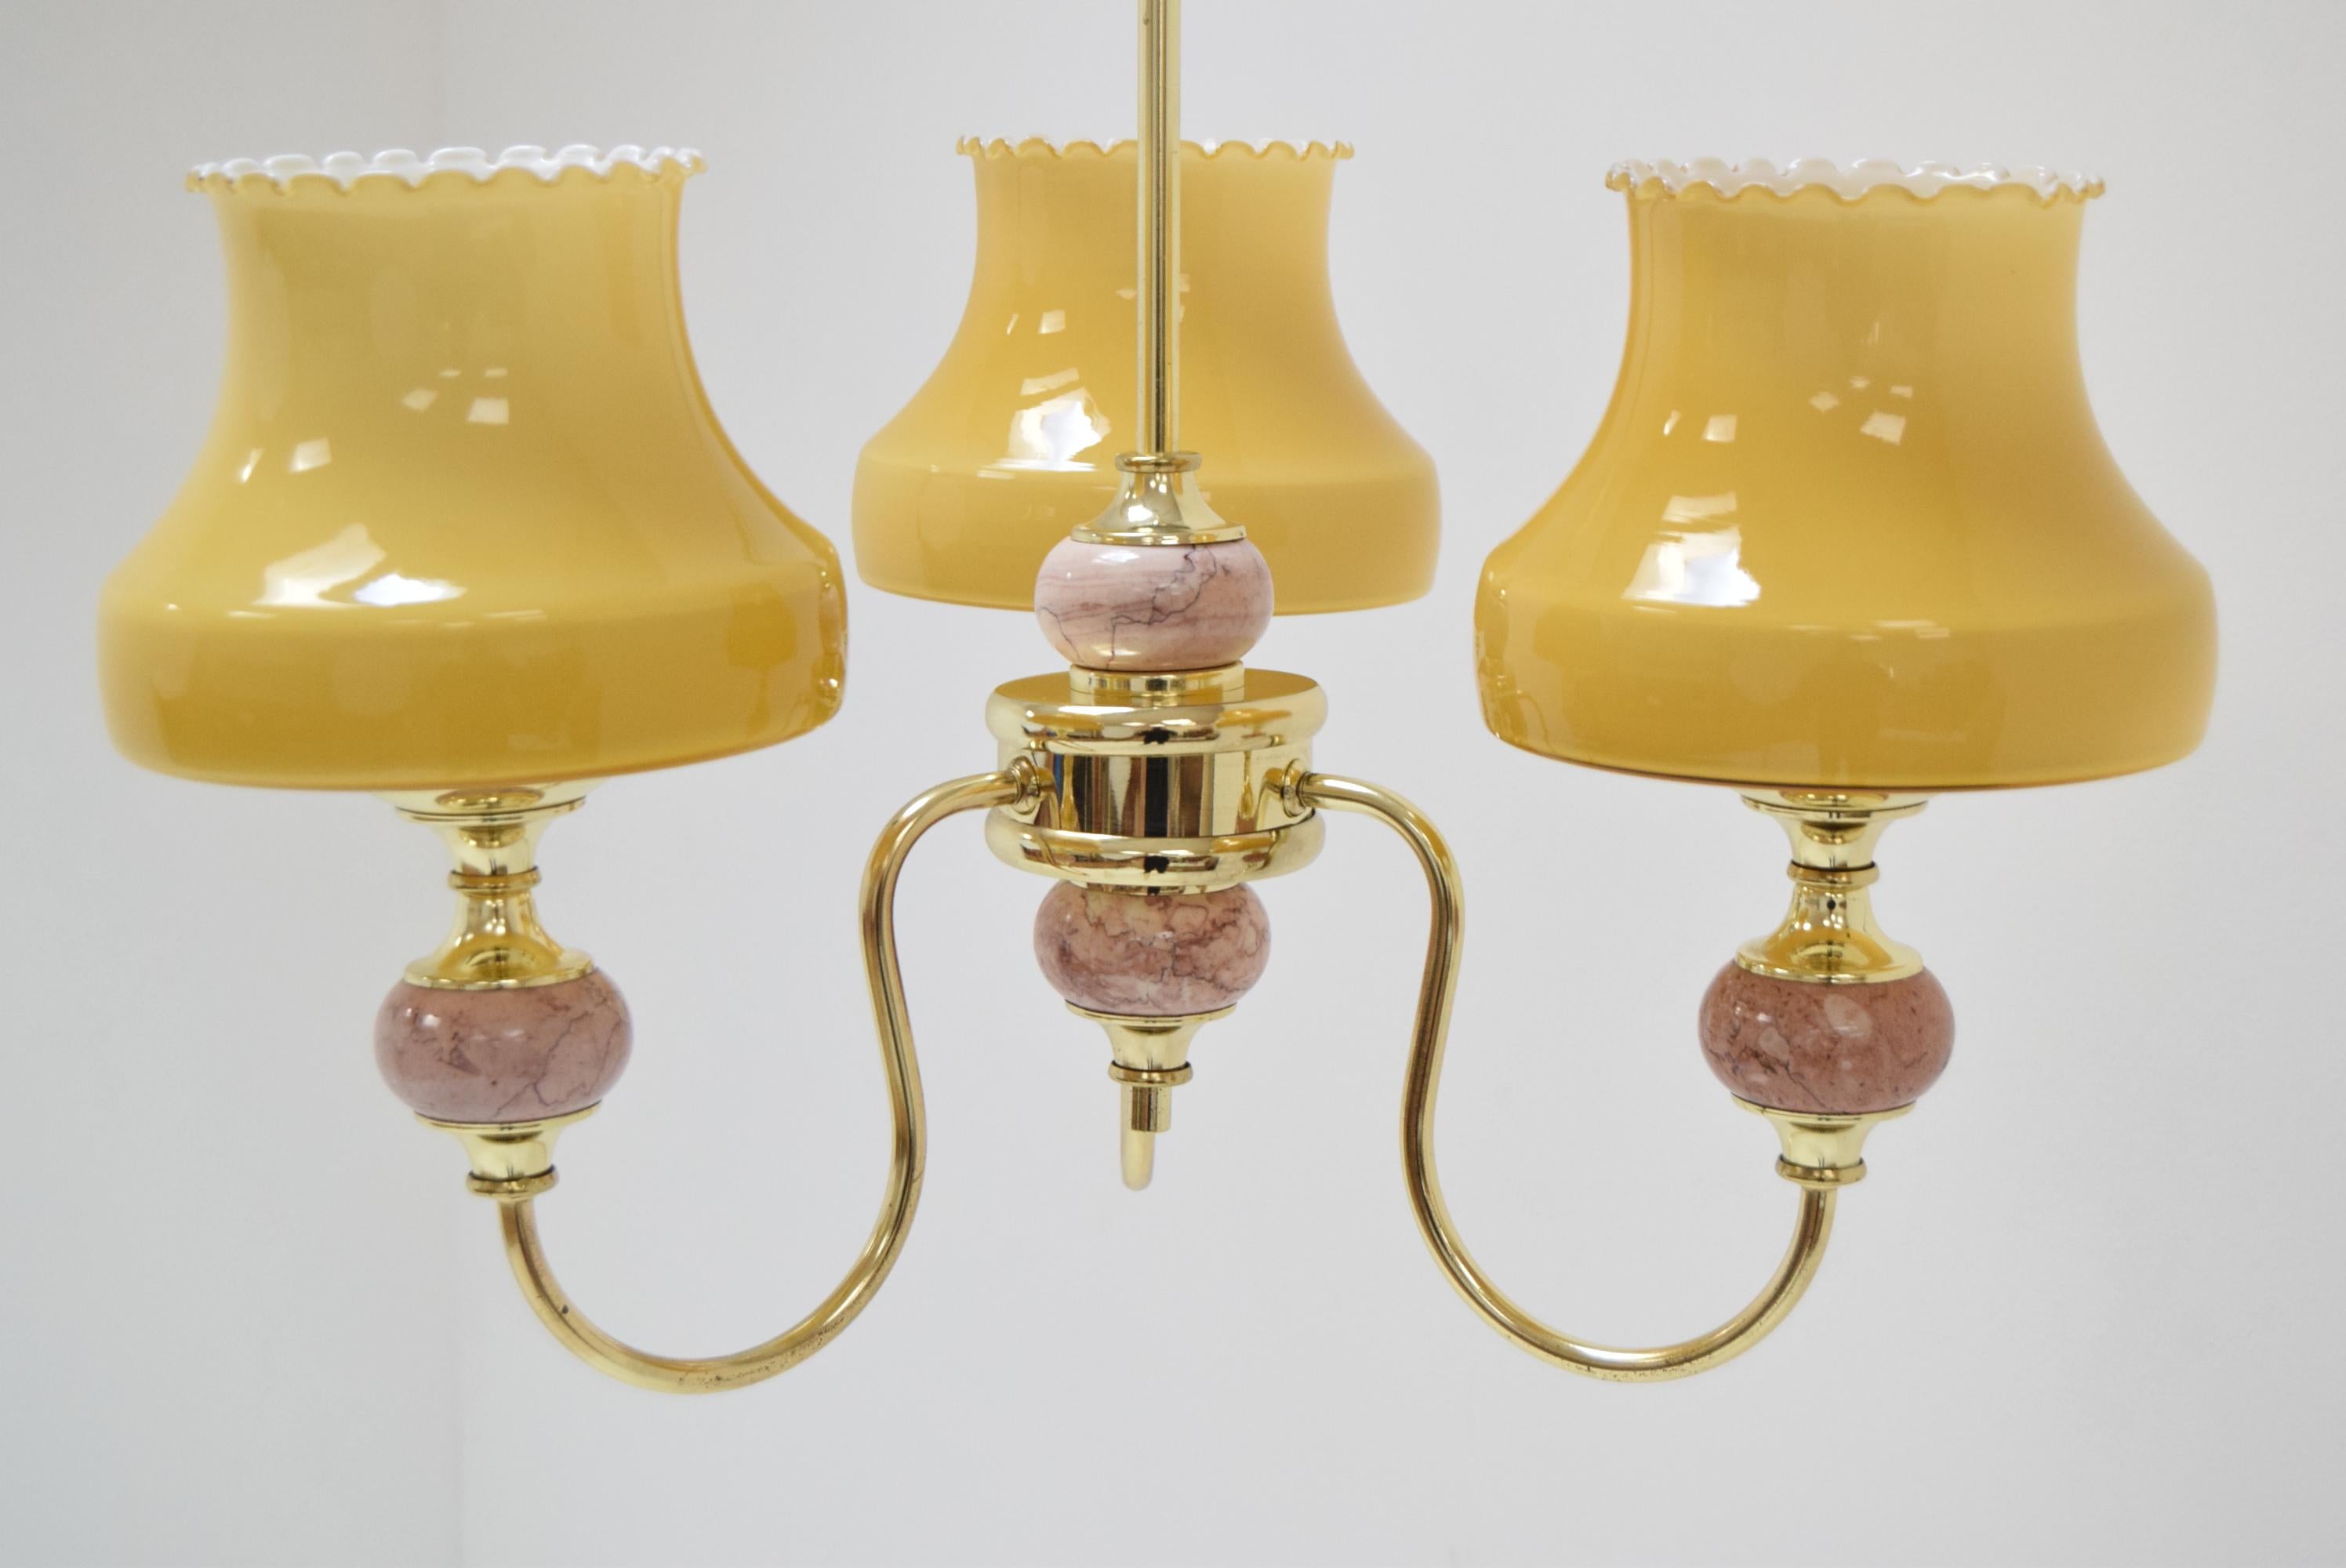 Mid-century Design Chandelier, 1960's.
Made in Germany 
Made of glass, brass, marble.
3x E27 or E26 bulb
With aged patina
Re-polished
Fully functional
Good Original condition
US wiring compatible.